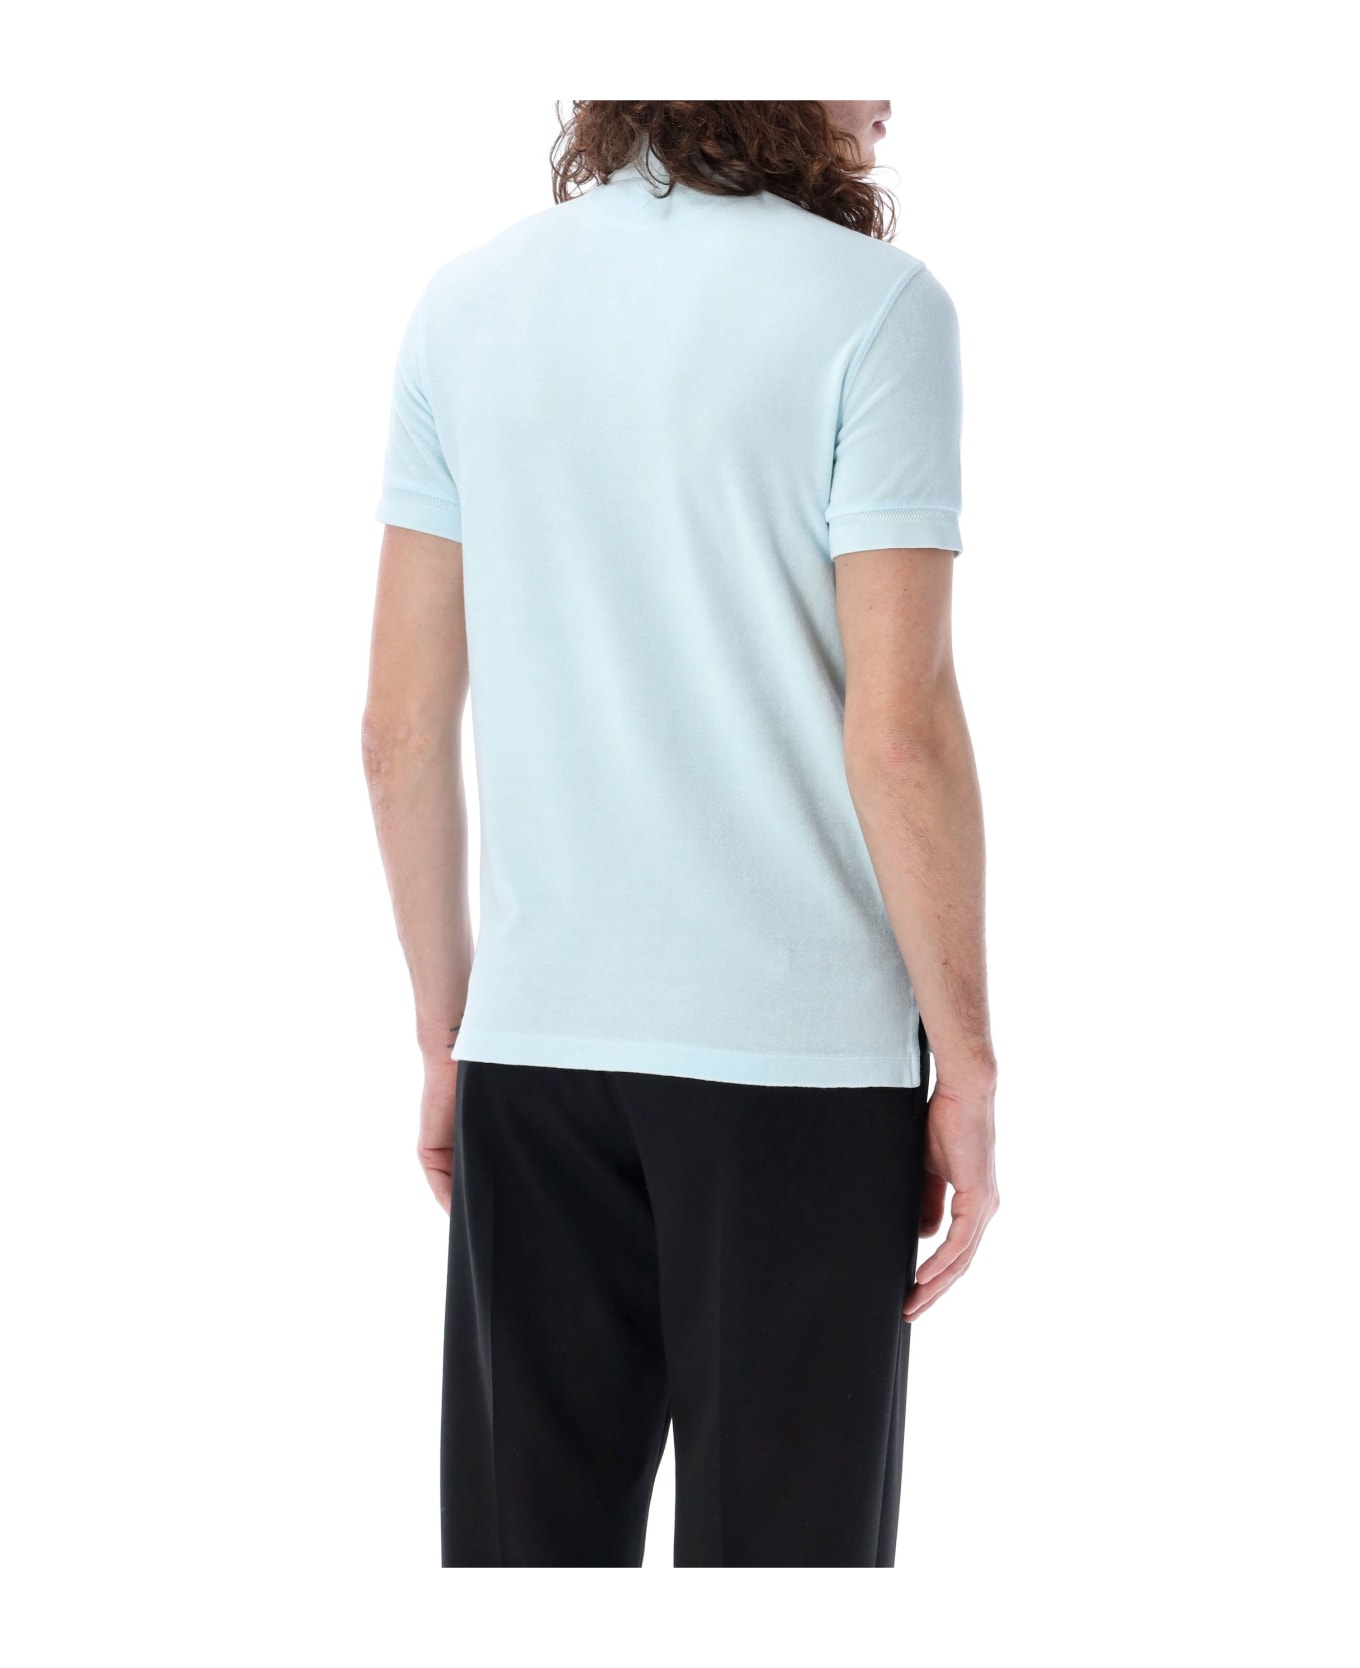 Tom Ford Towelling Polo - CRYSTAL BLUE